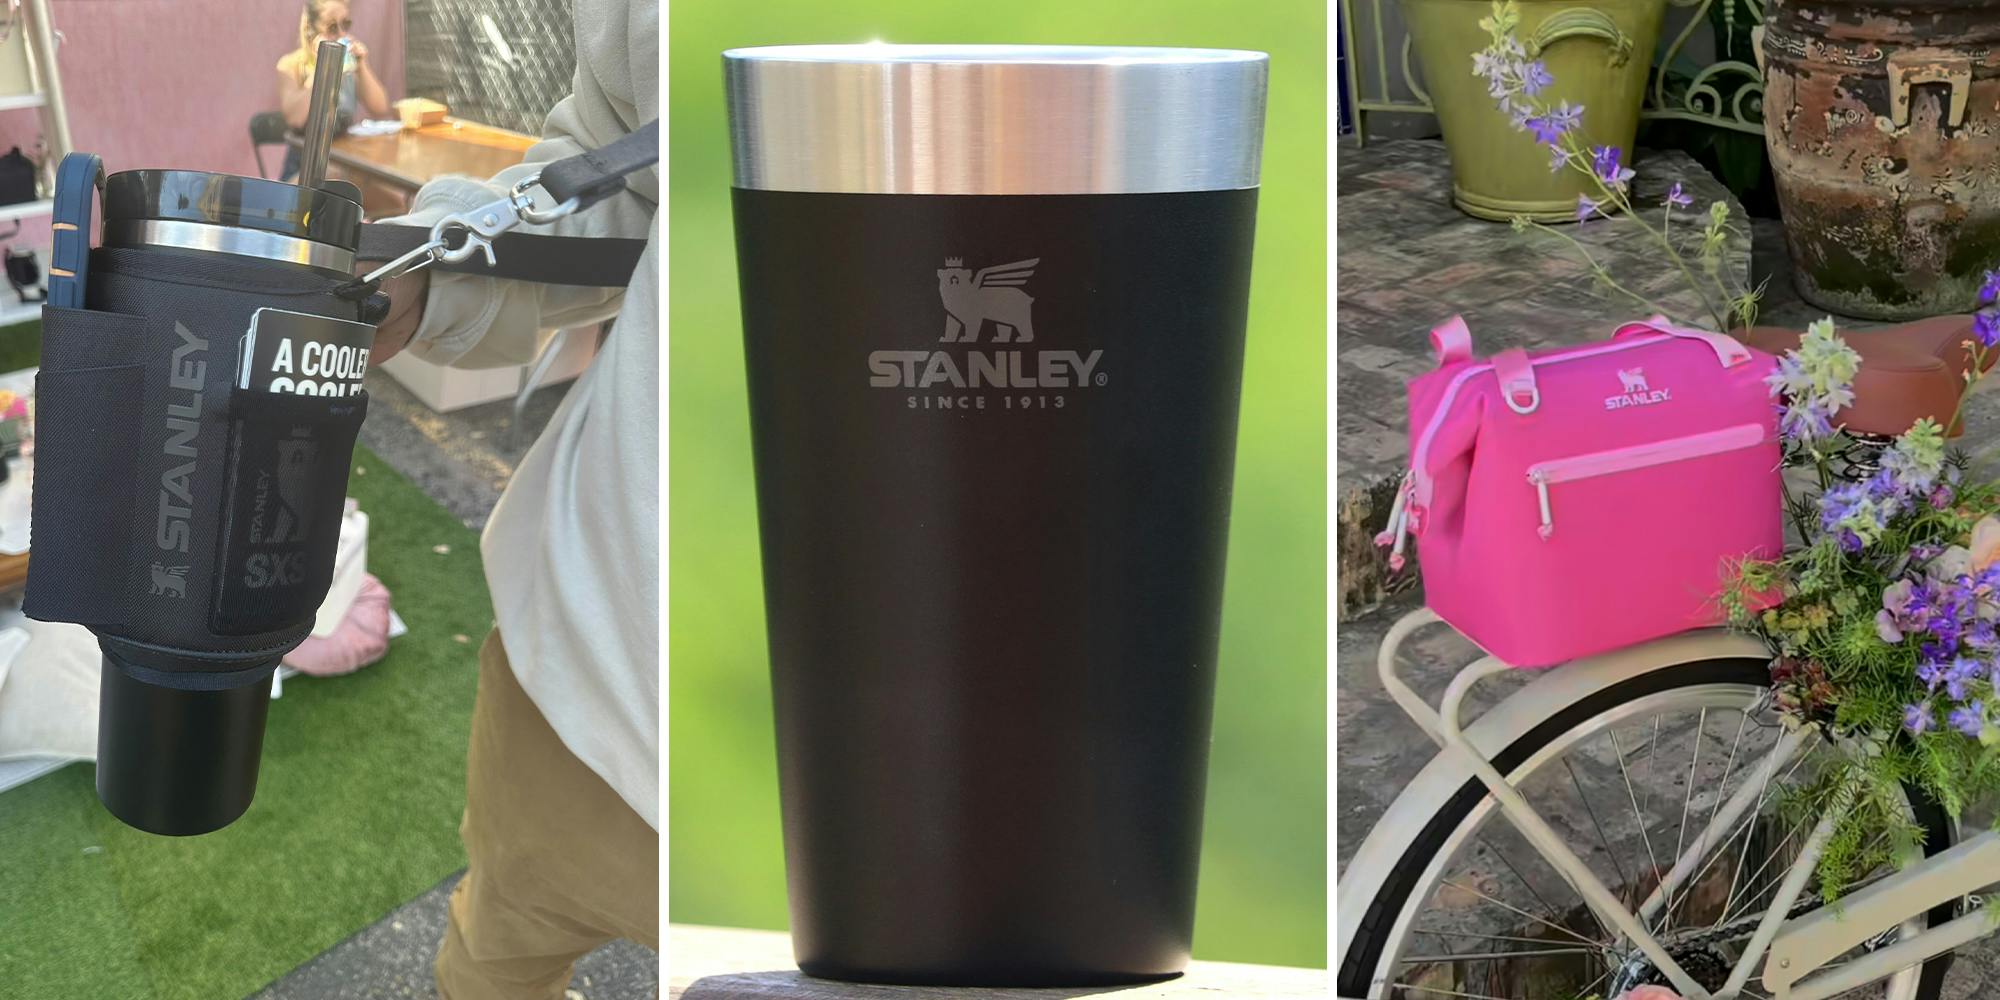 Stanley black thermal cup for drinking beer, on green background